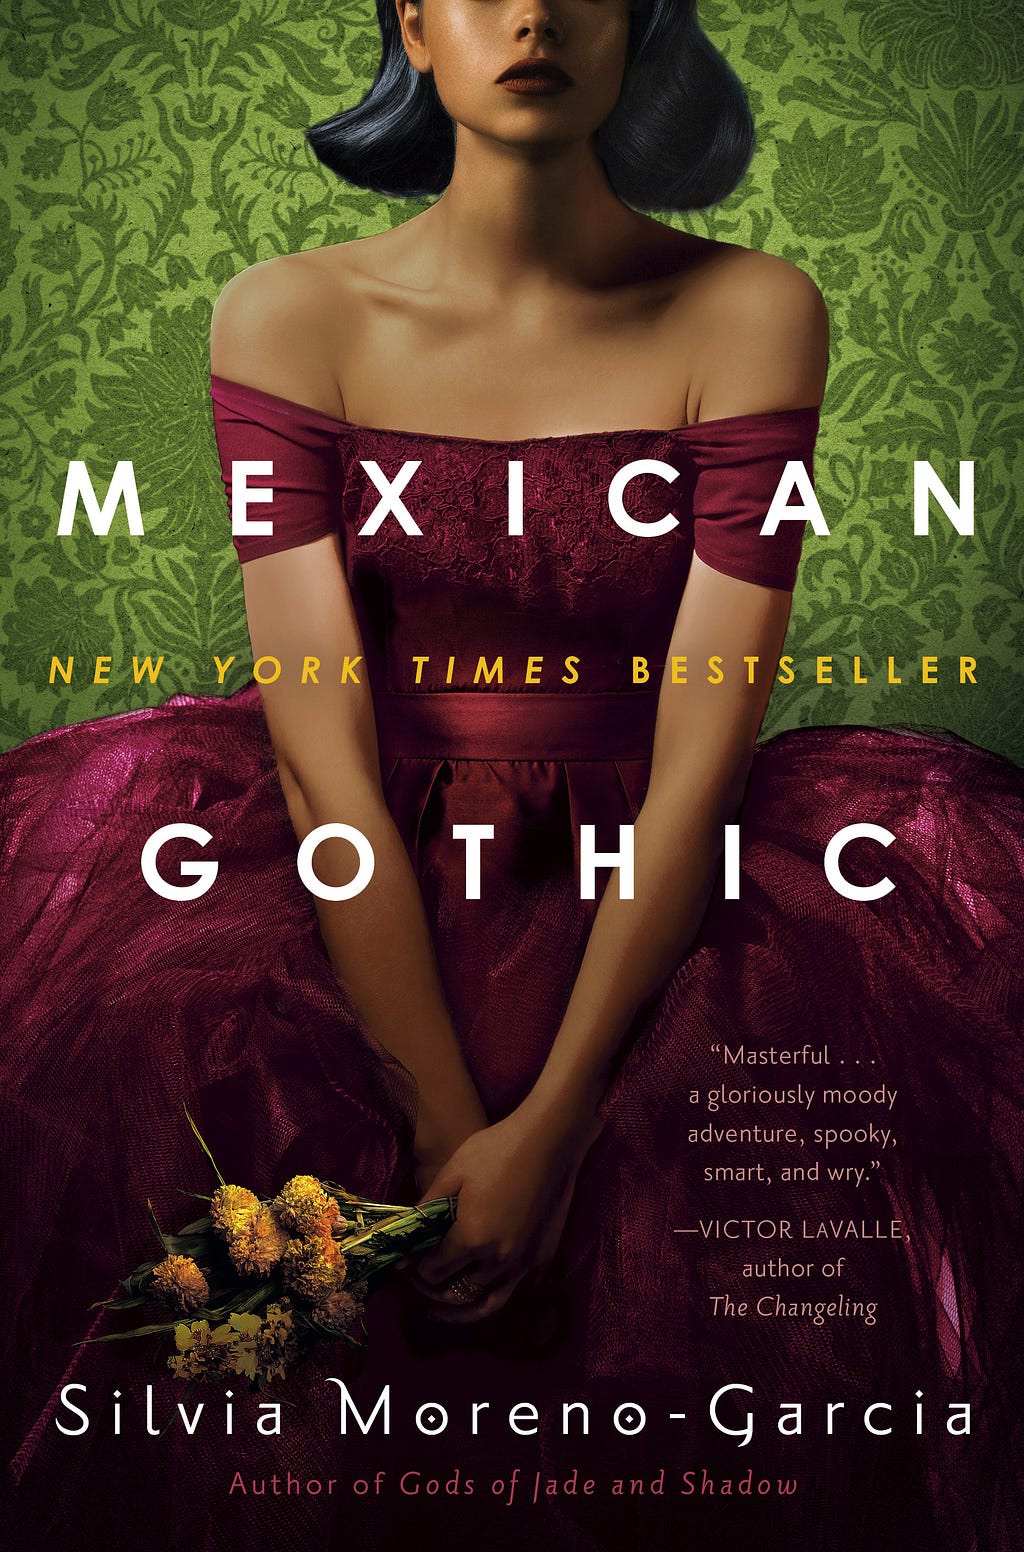 The cover of the book “Mexican Gothic” (2020) by Silvia Moreno-Garcia